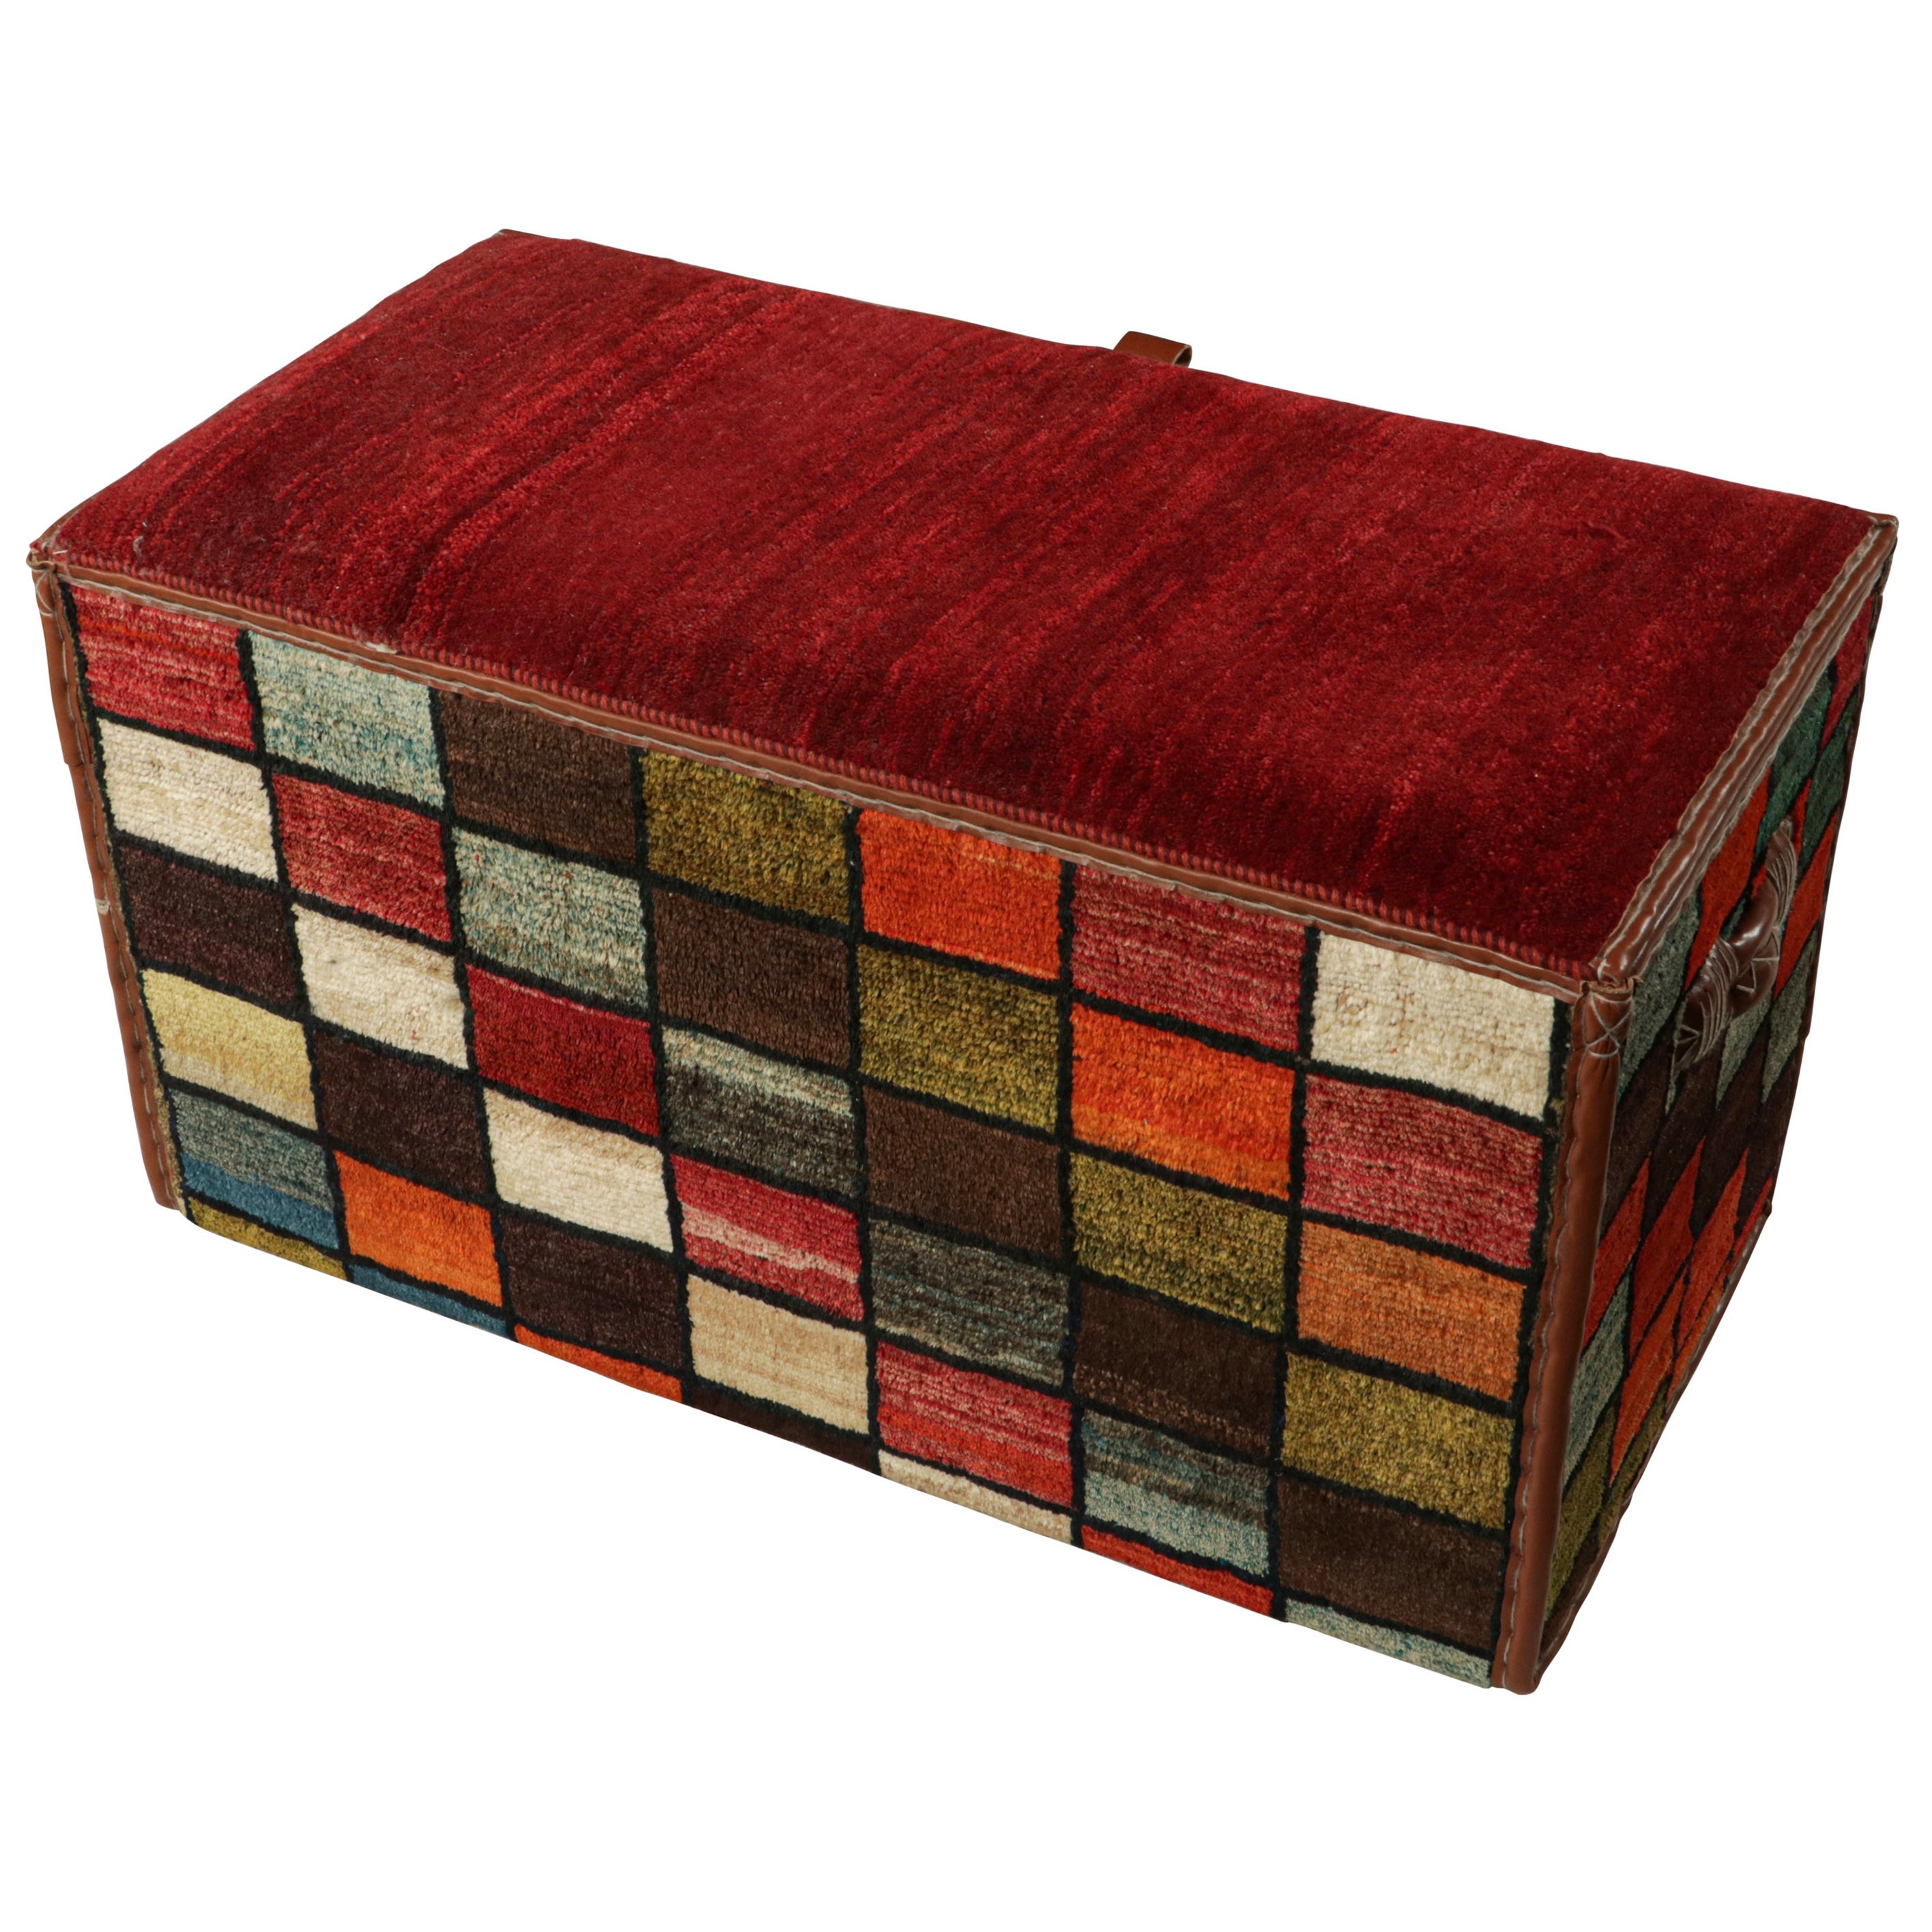 Rug & Kilim’s Persian Tribal Storage Chest with Colorful Geometric Patterns For Sale